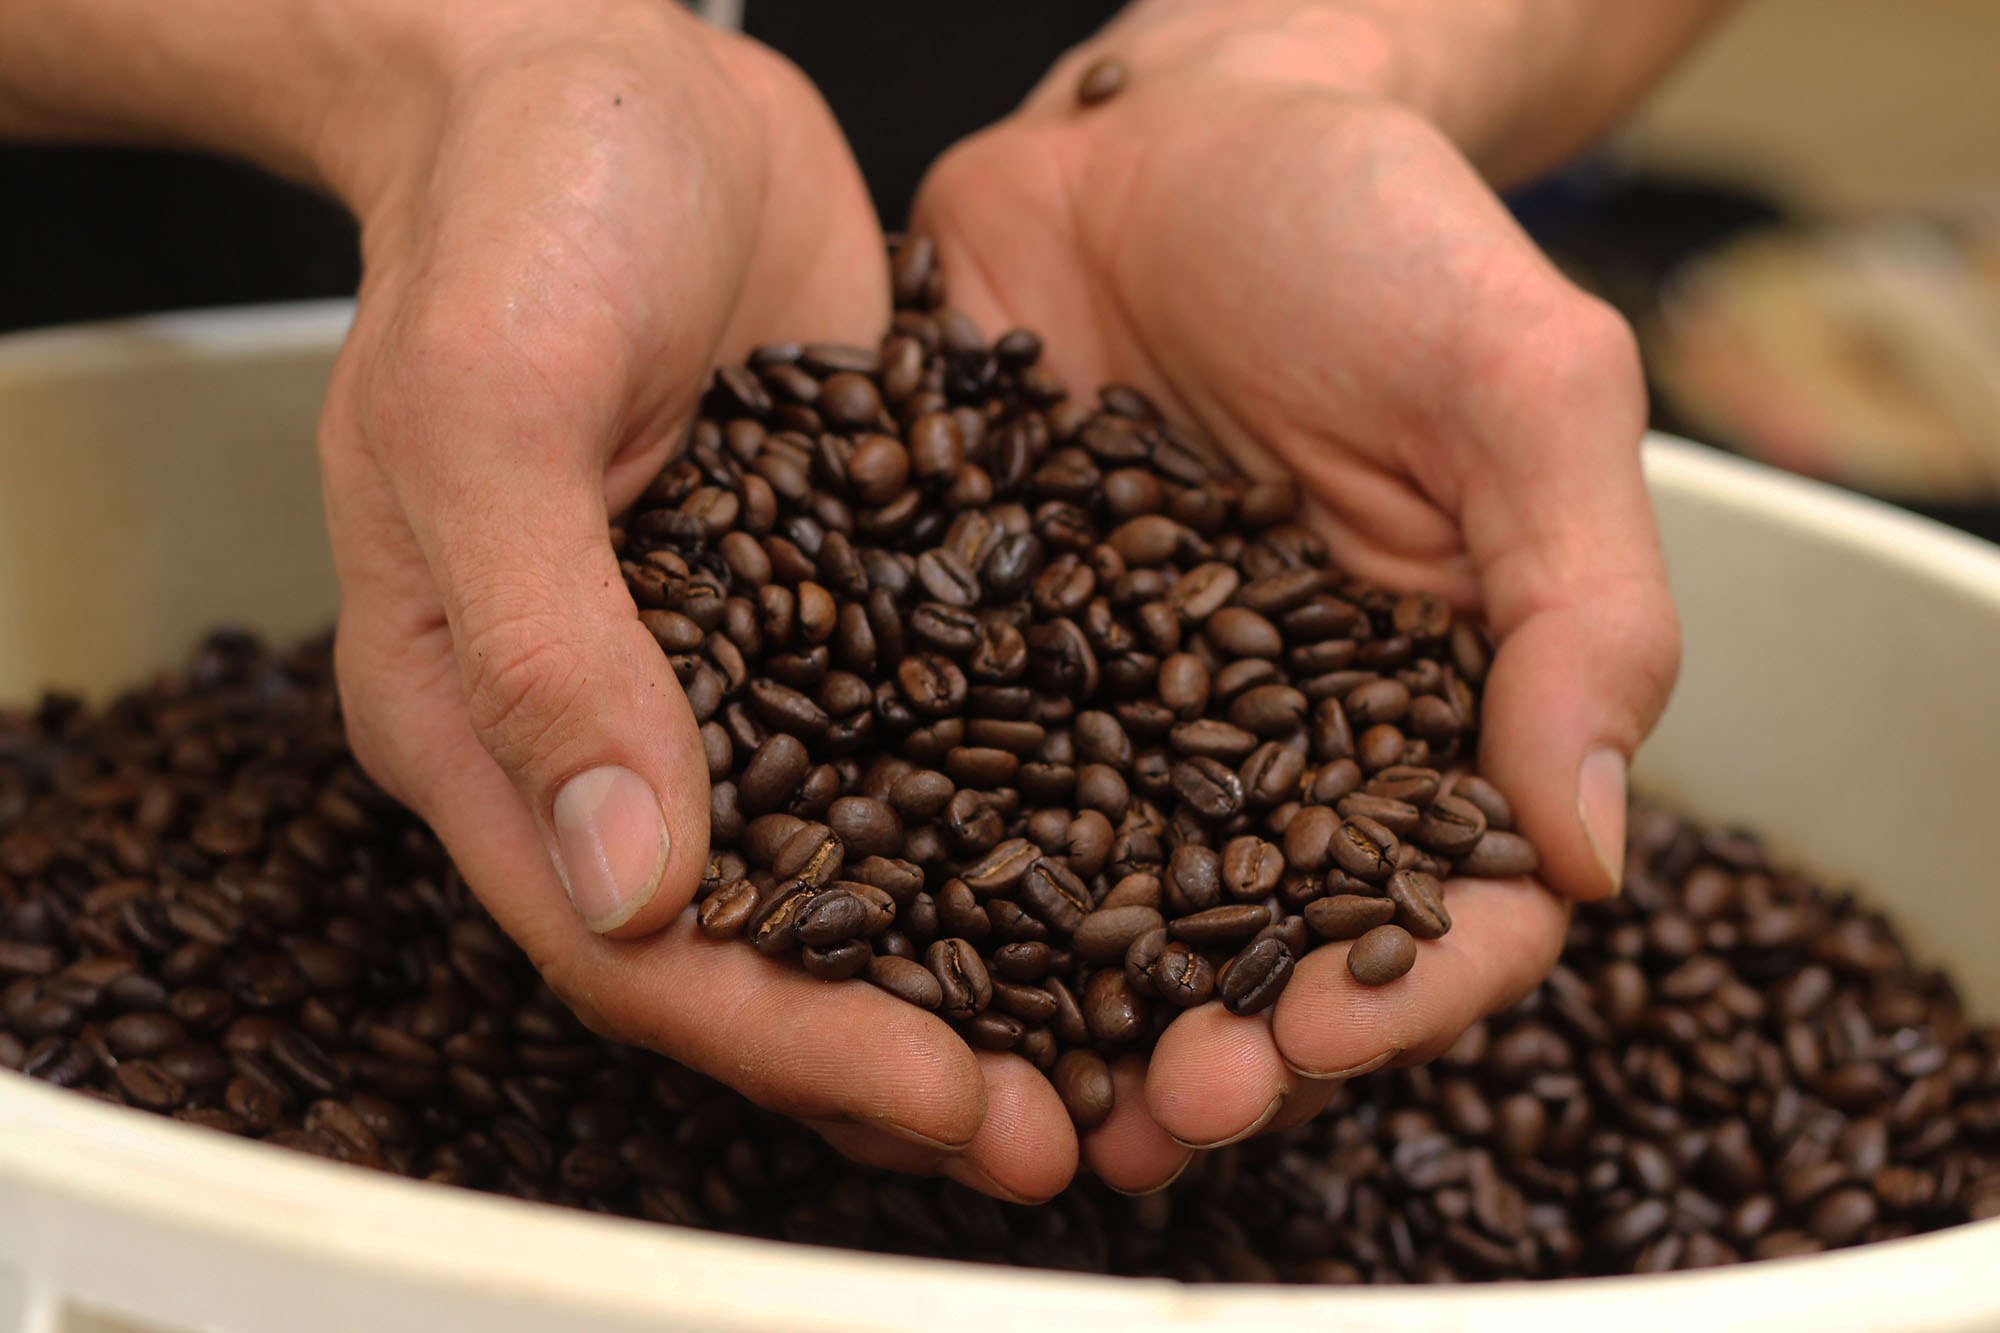 Cupped hands holding a pile of newly finished coffee beans.